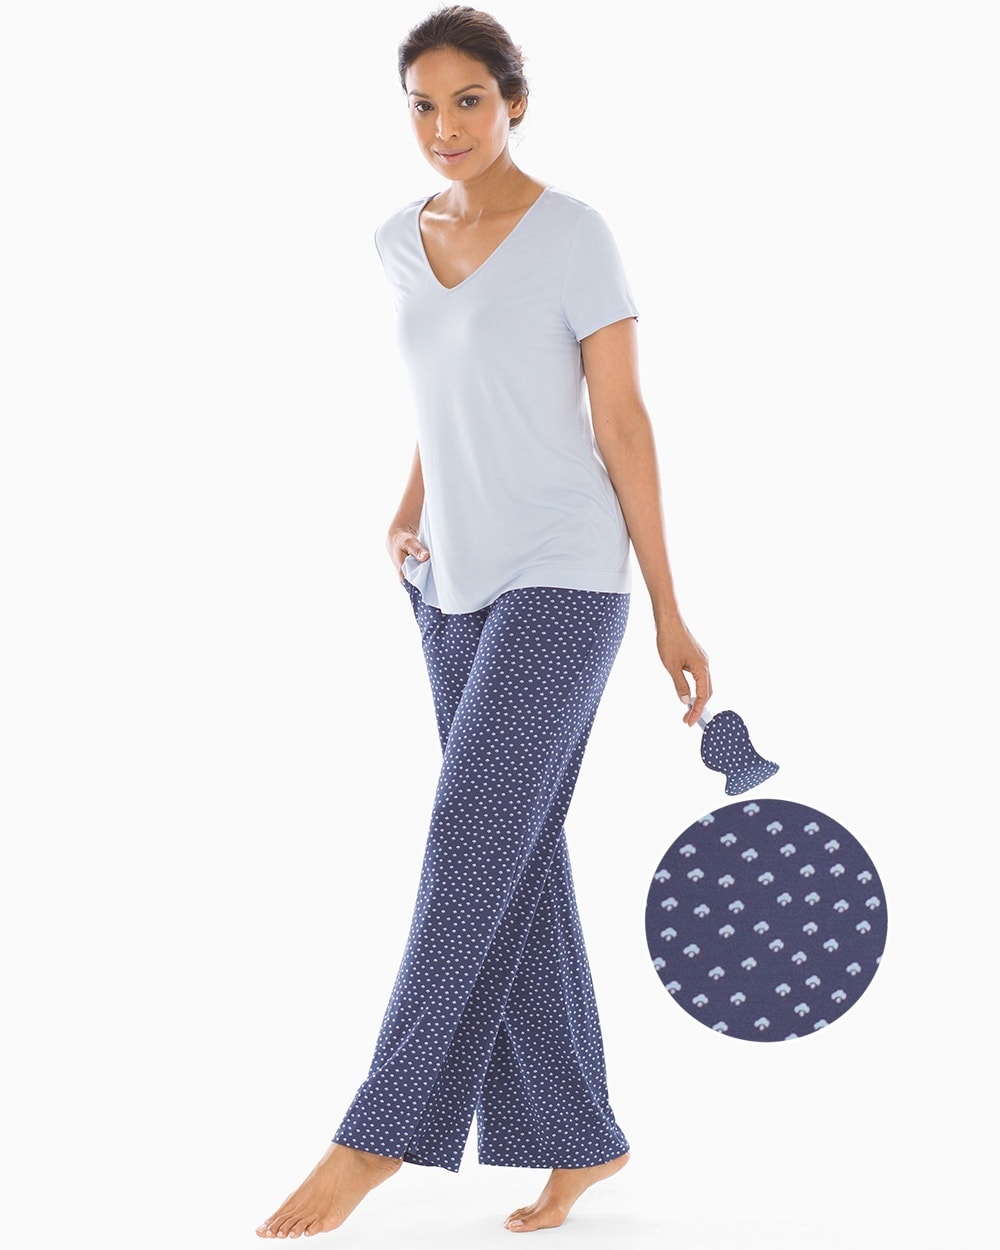 Cool Nights V-Neck Short Sleeve Pajama Set with Eyemask Airy Dot with Ocean Air